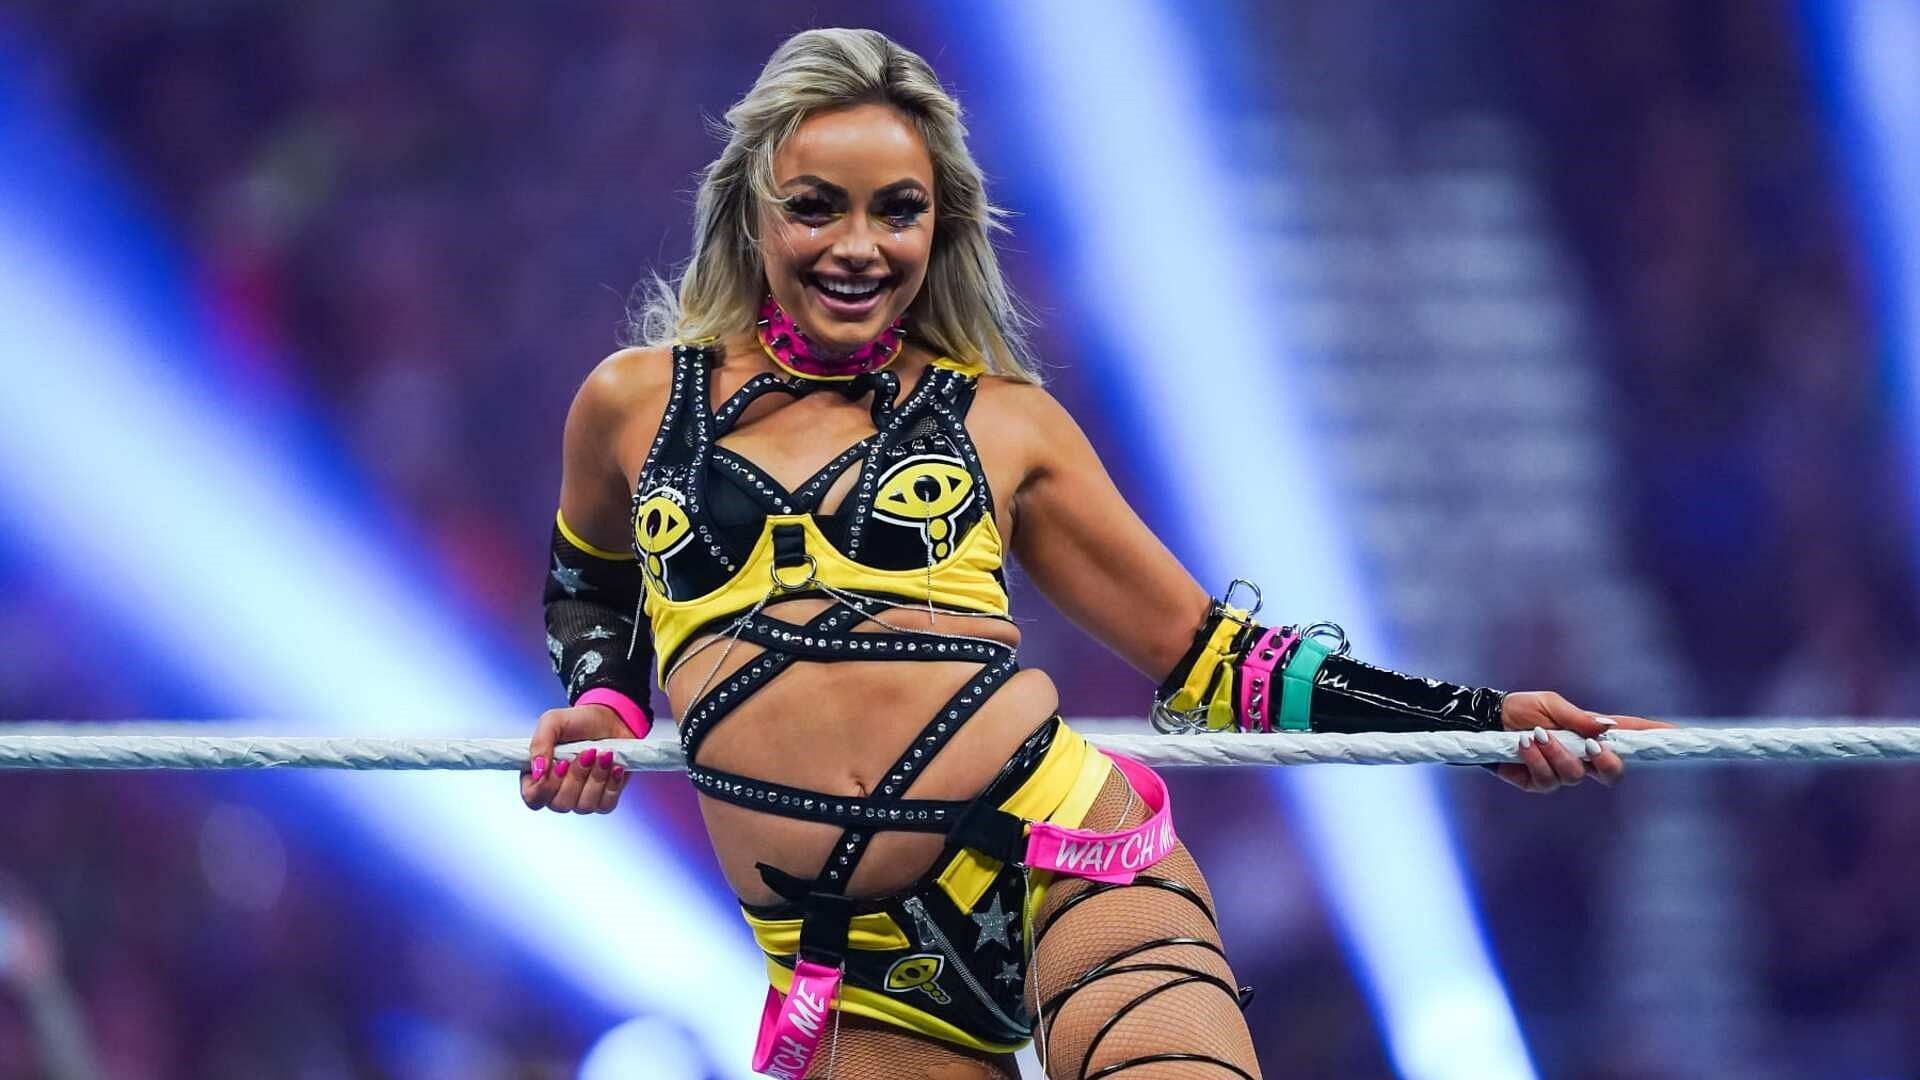 Liv Morgan poses for fans in the WWE ring